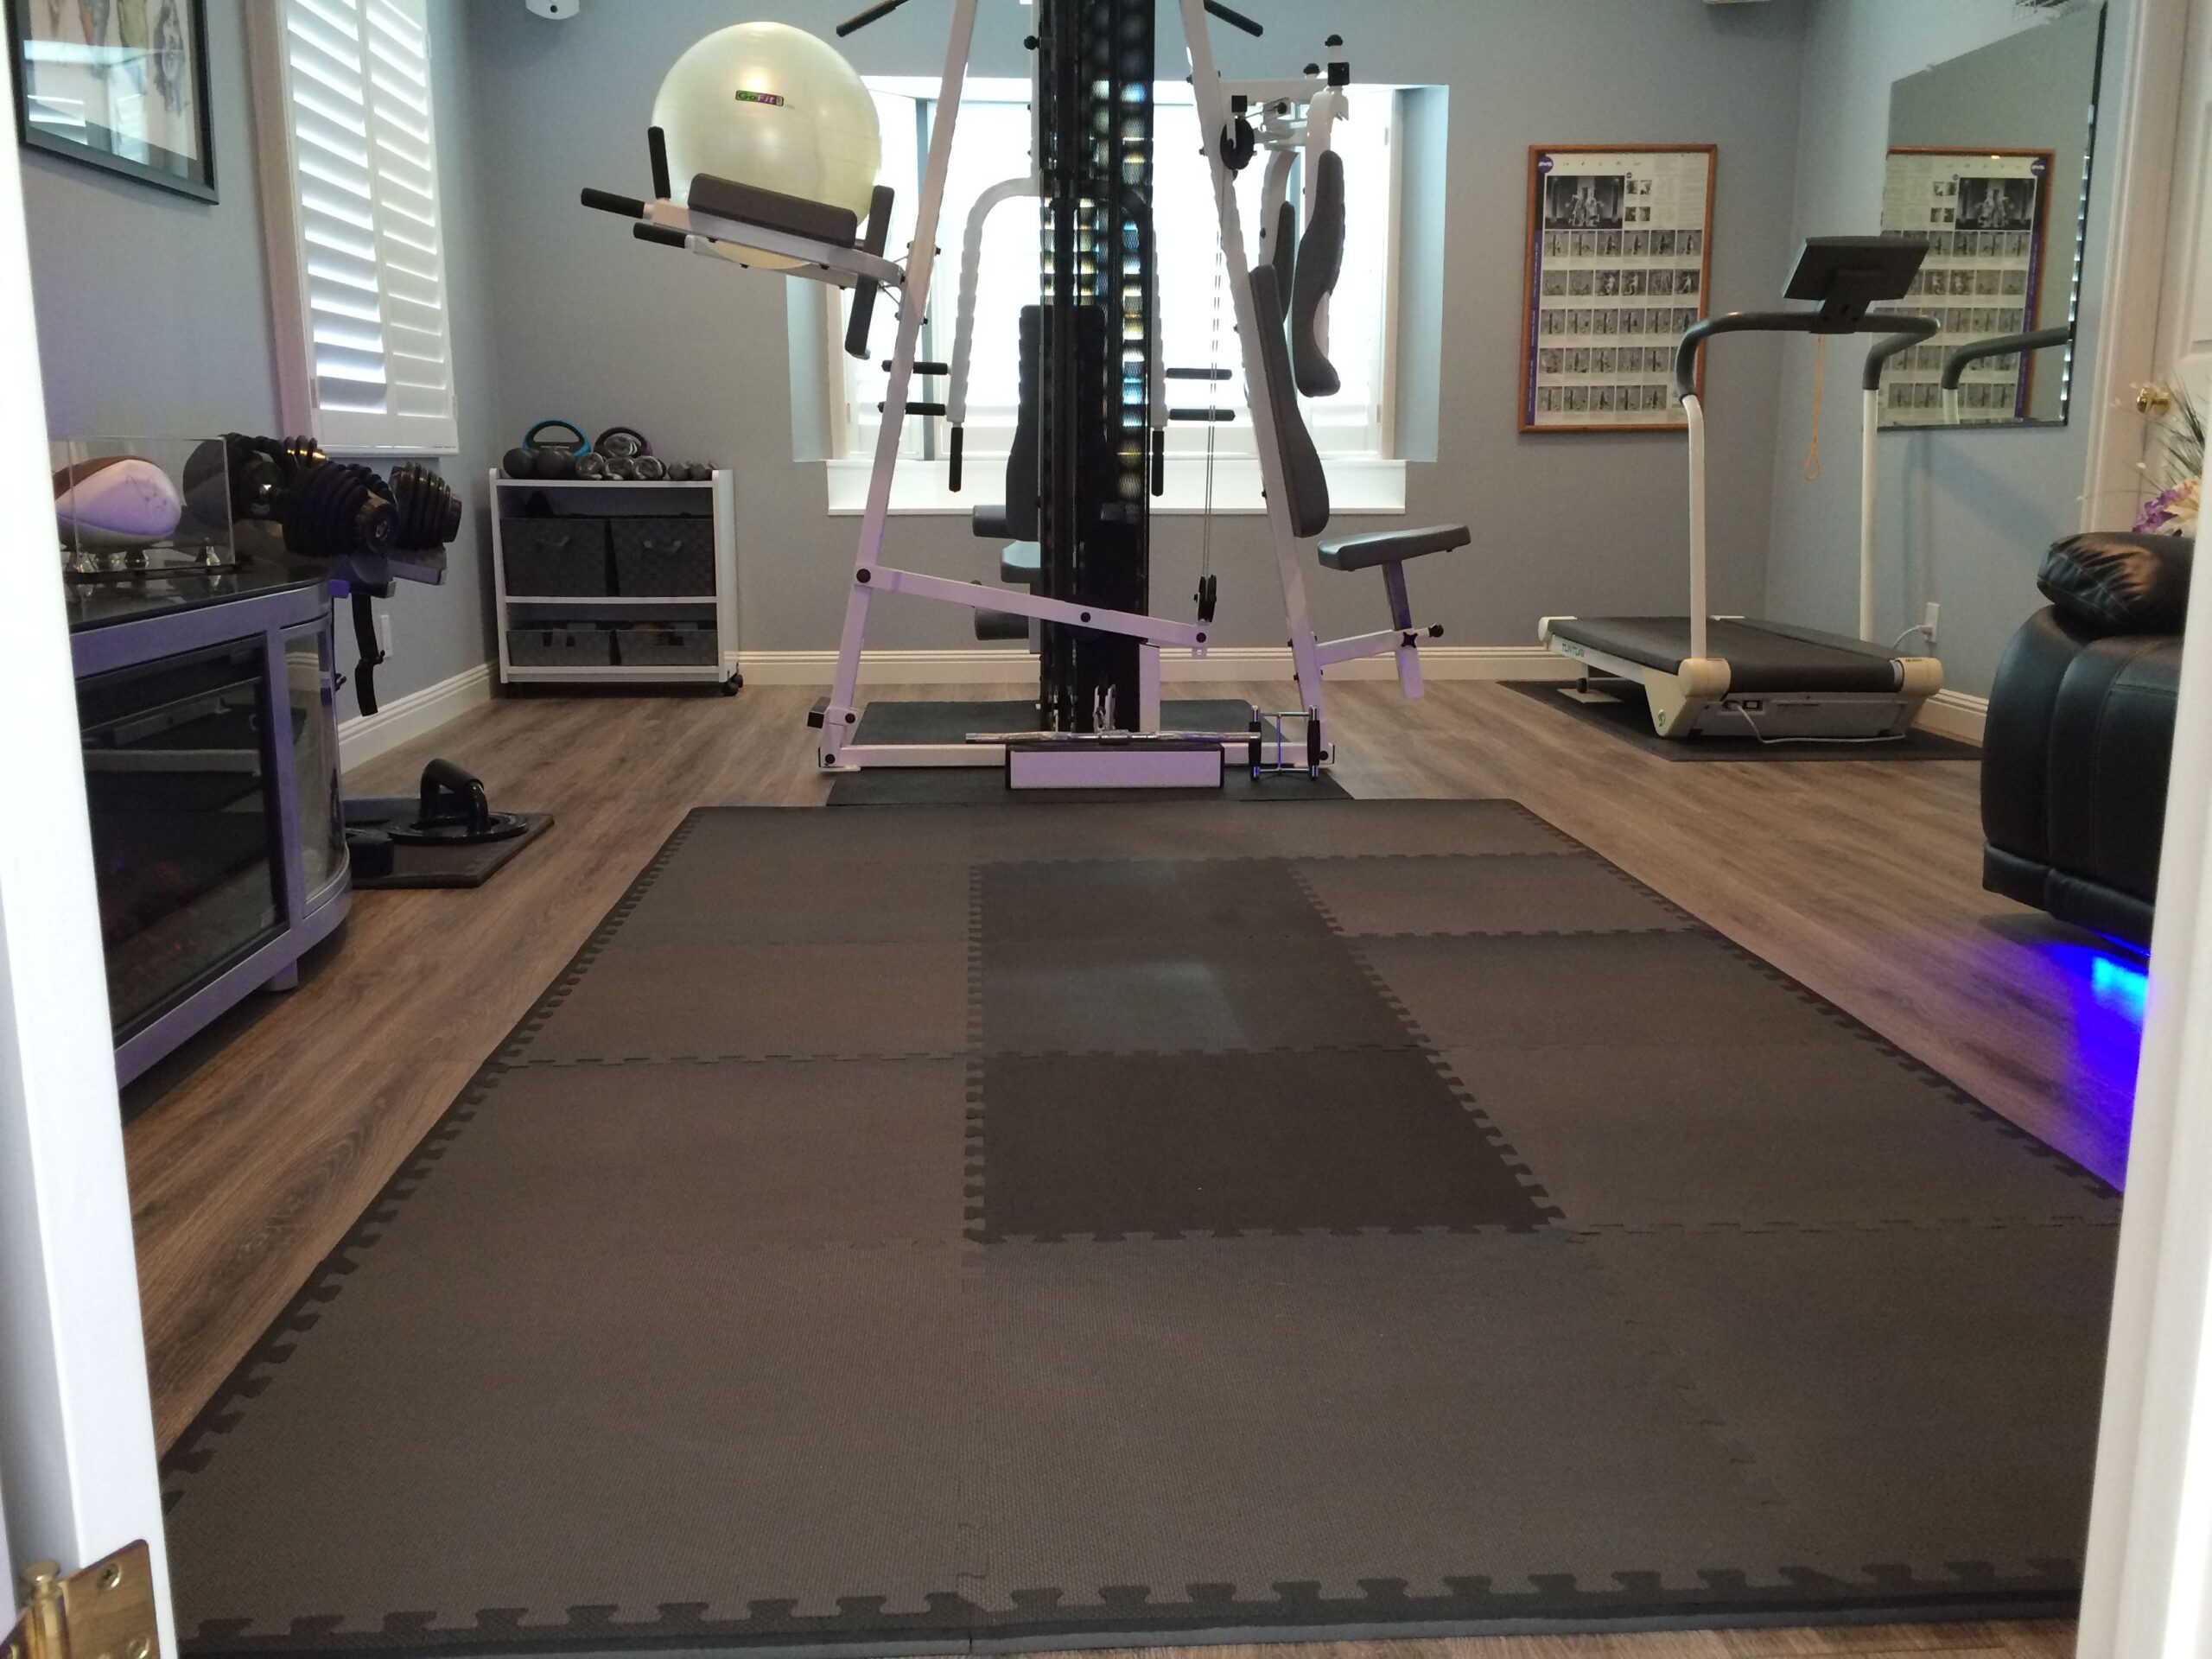 The Advantages of Rubber Matting for Your Gym Floor